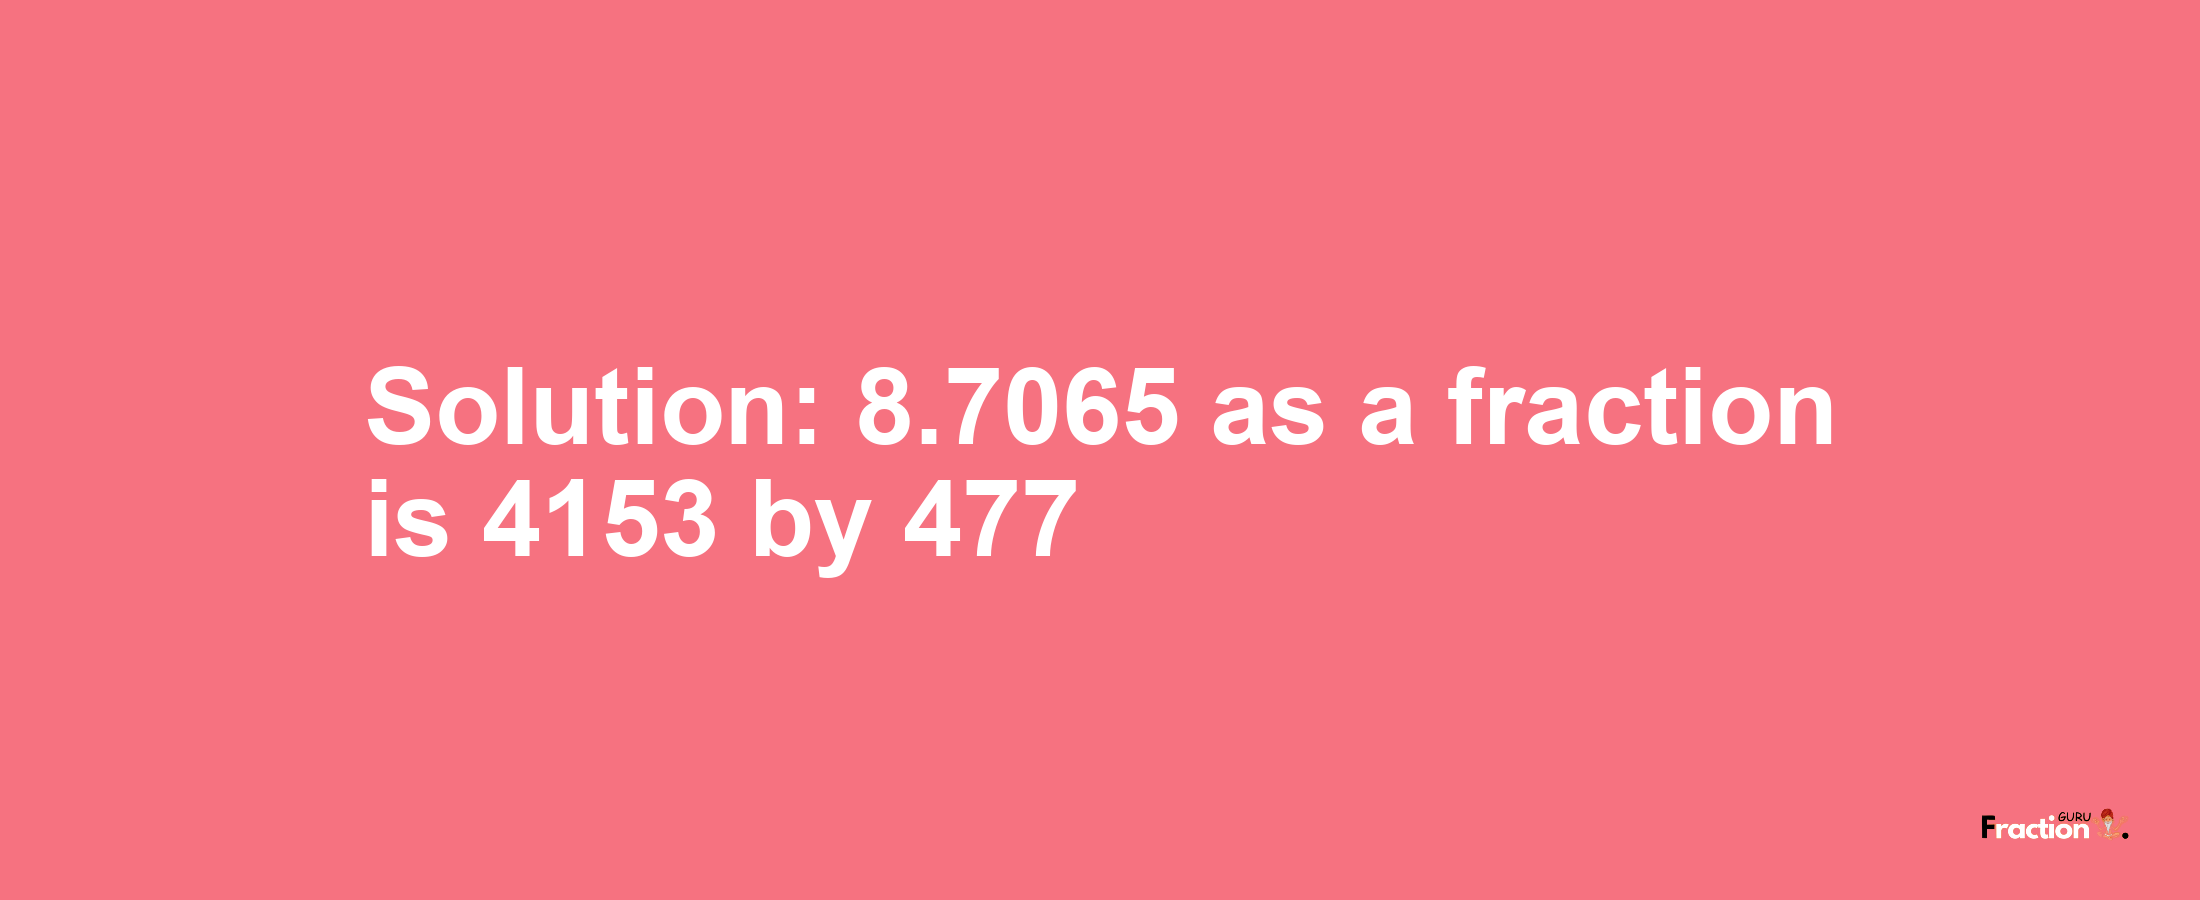 Solution:8.7065 as a fraction is 4153/477